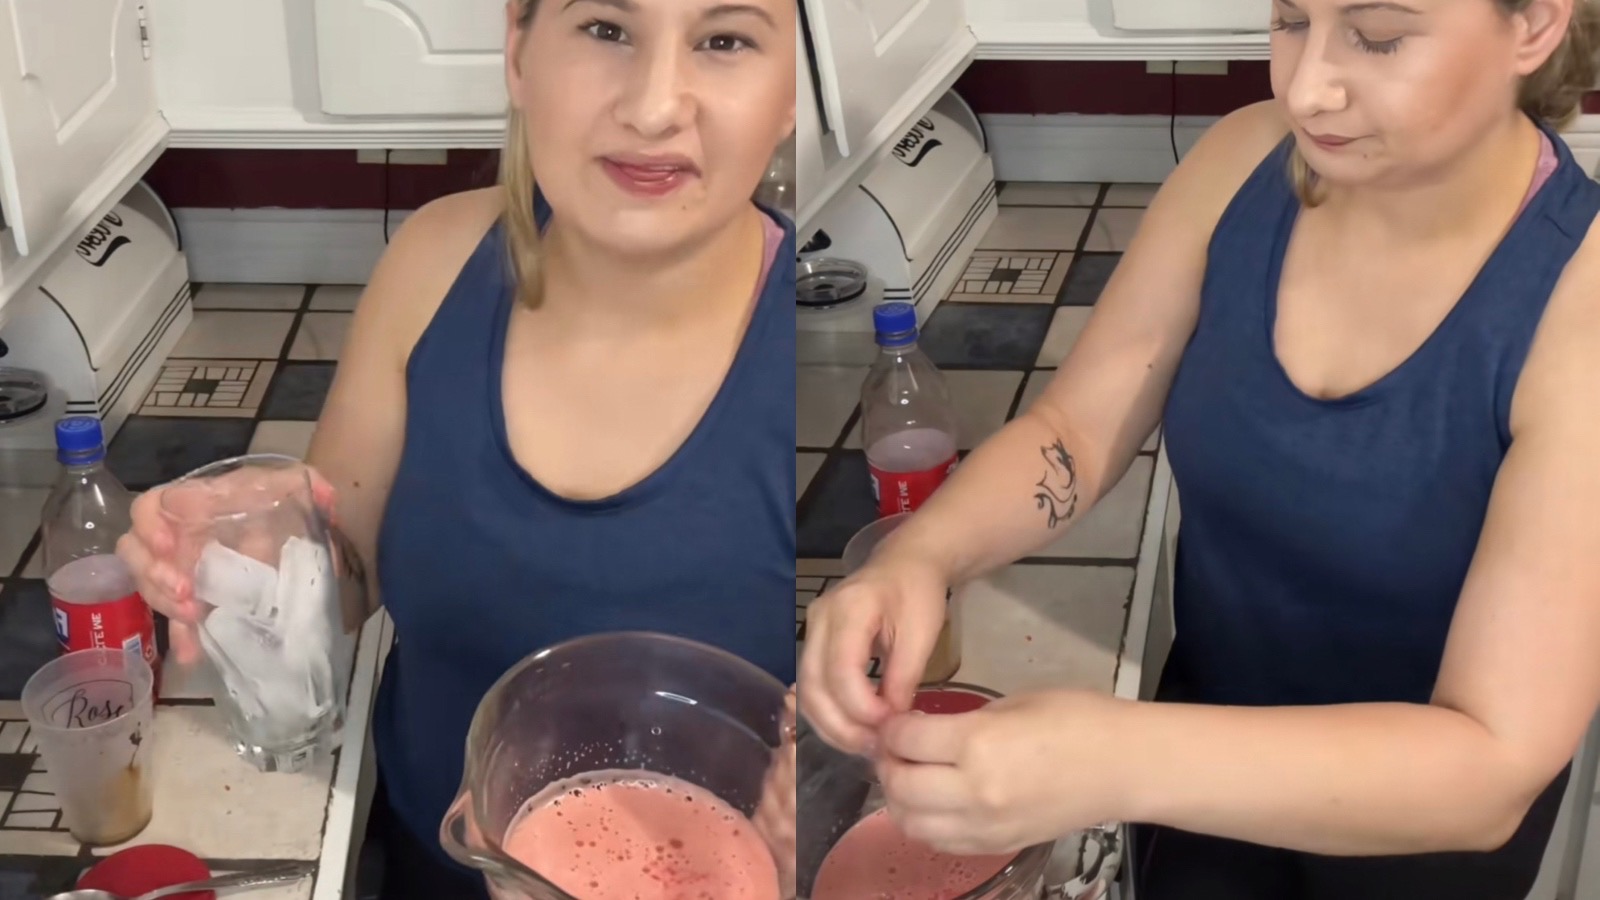 Gypsy Rose’s “prison-style energy drink” goes viral as fans ask her for jail hacks